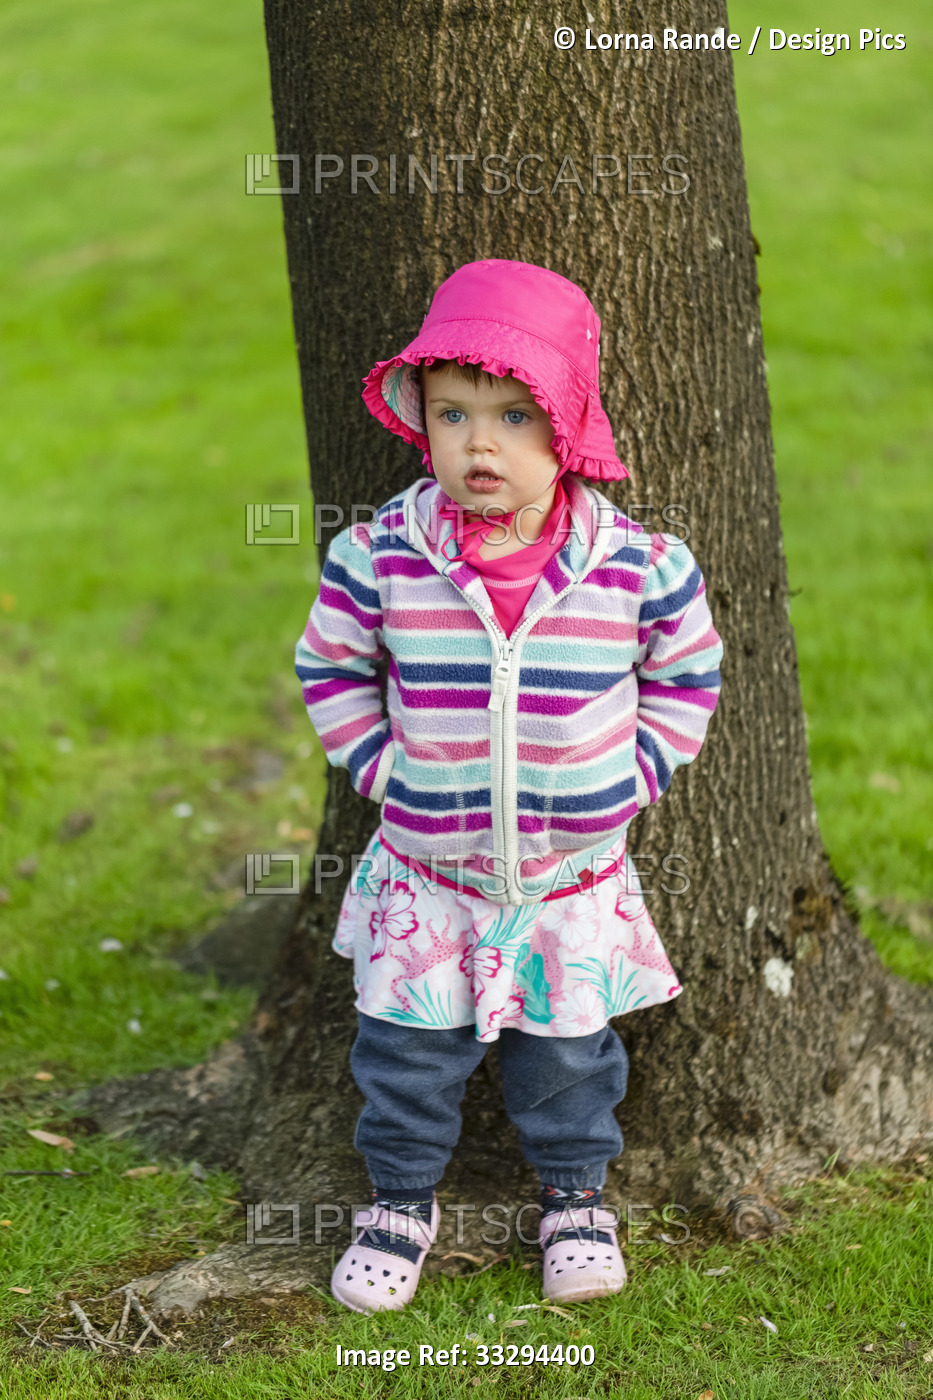 Portrait of young girl wearing colorful outfit standing in front of a tree in ...